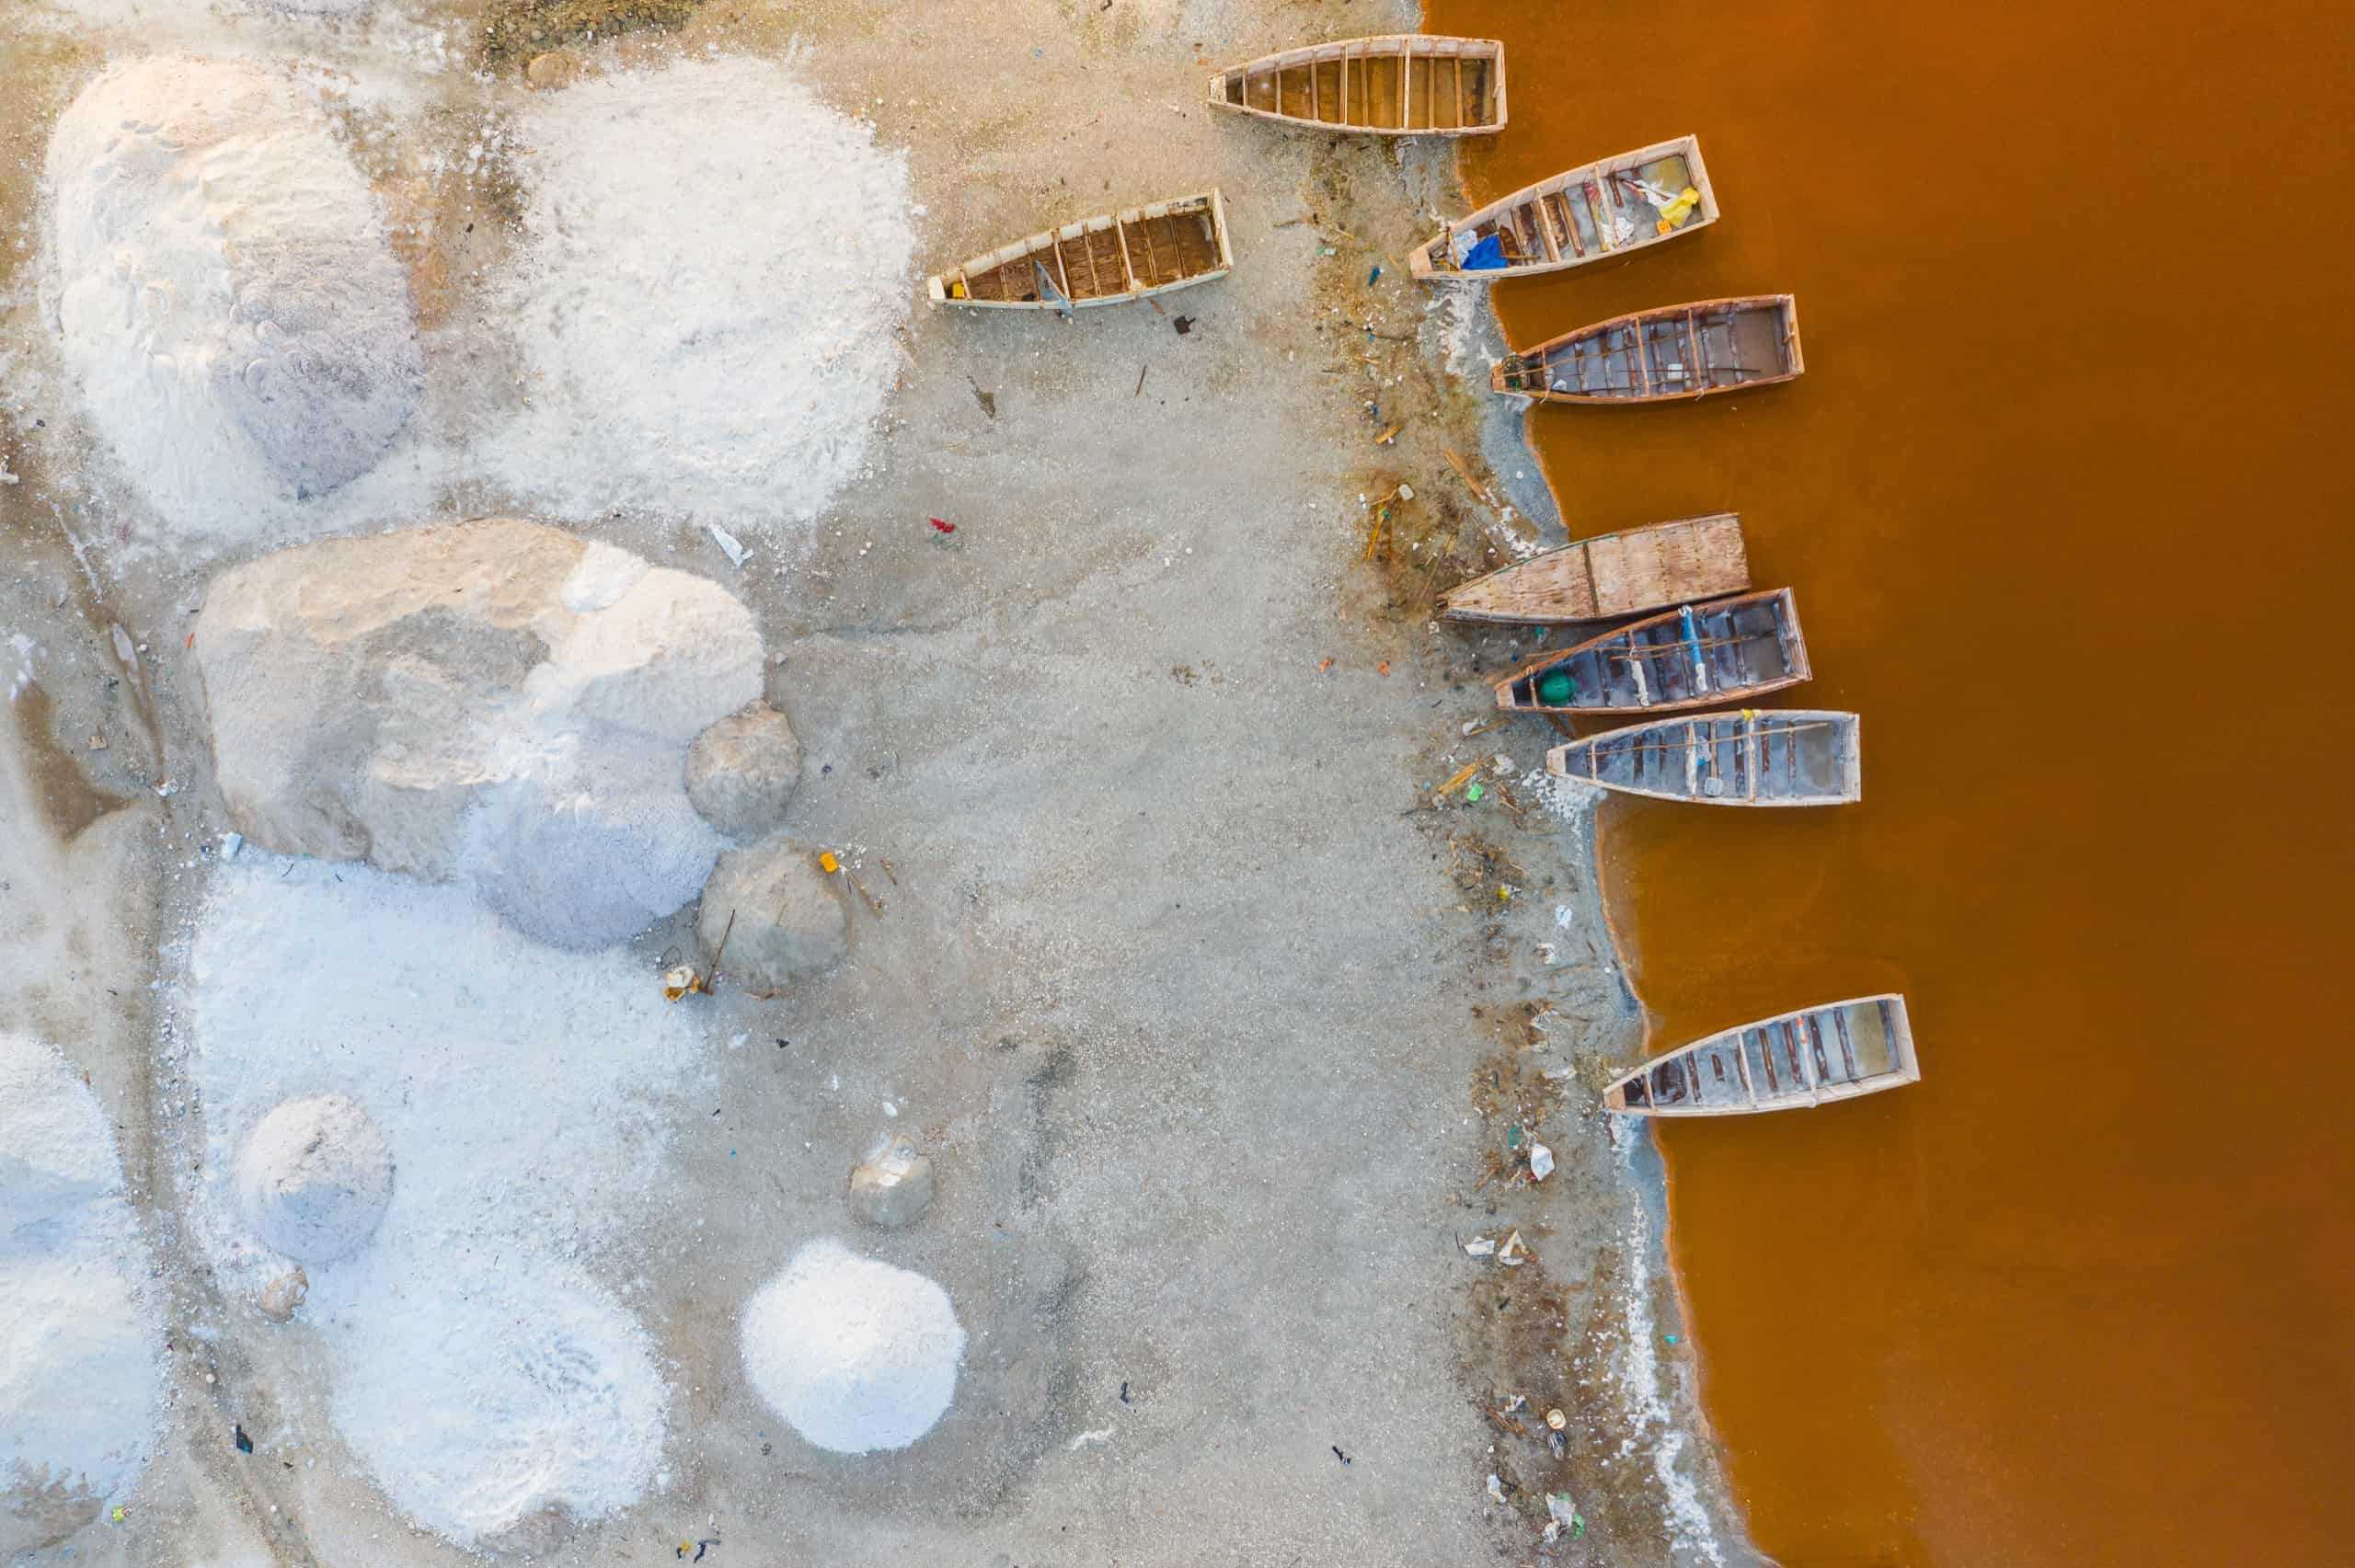 Aerial view of boats on a beach in Senegal